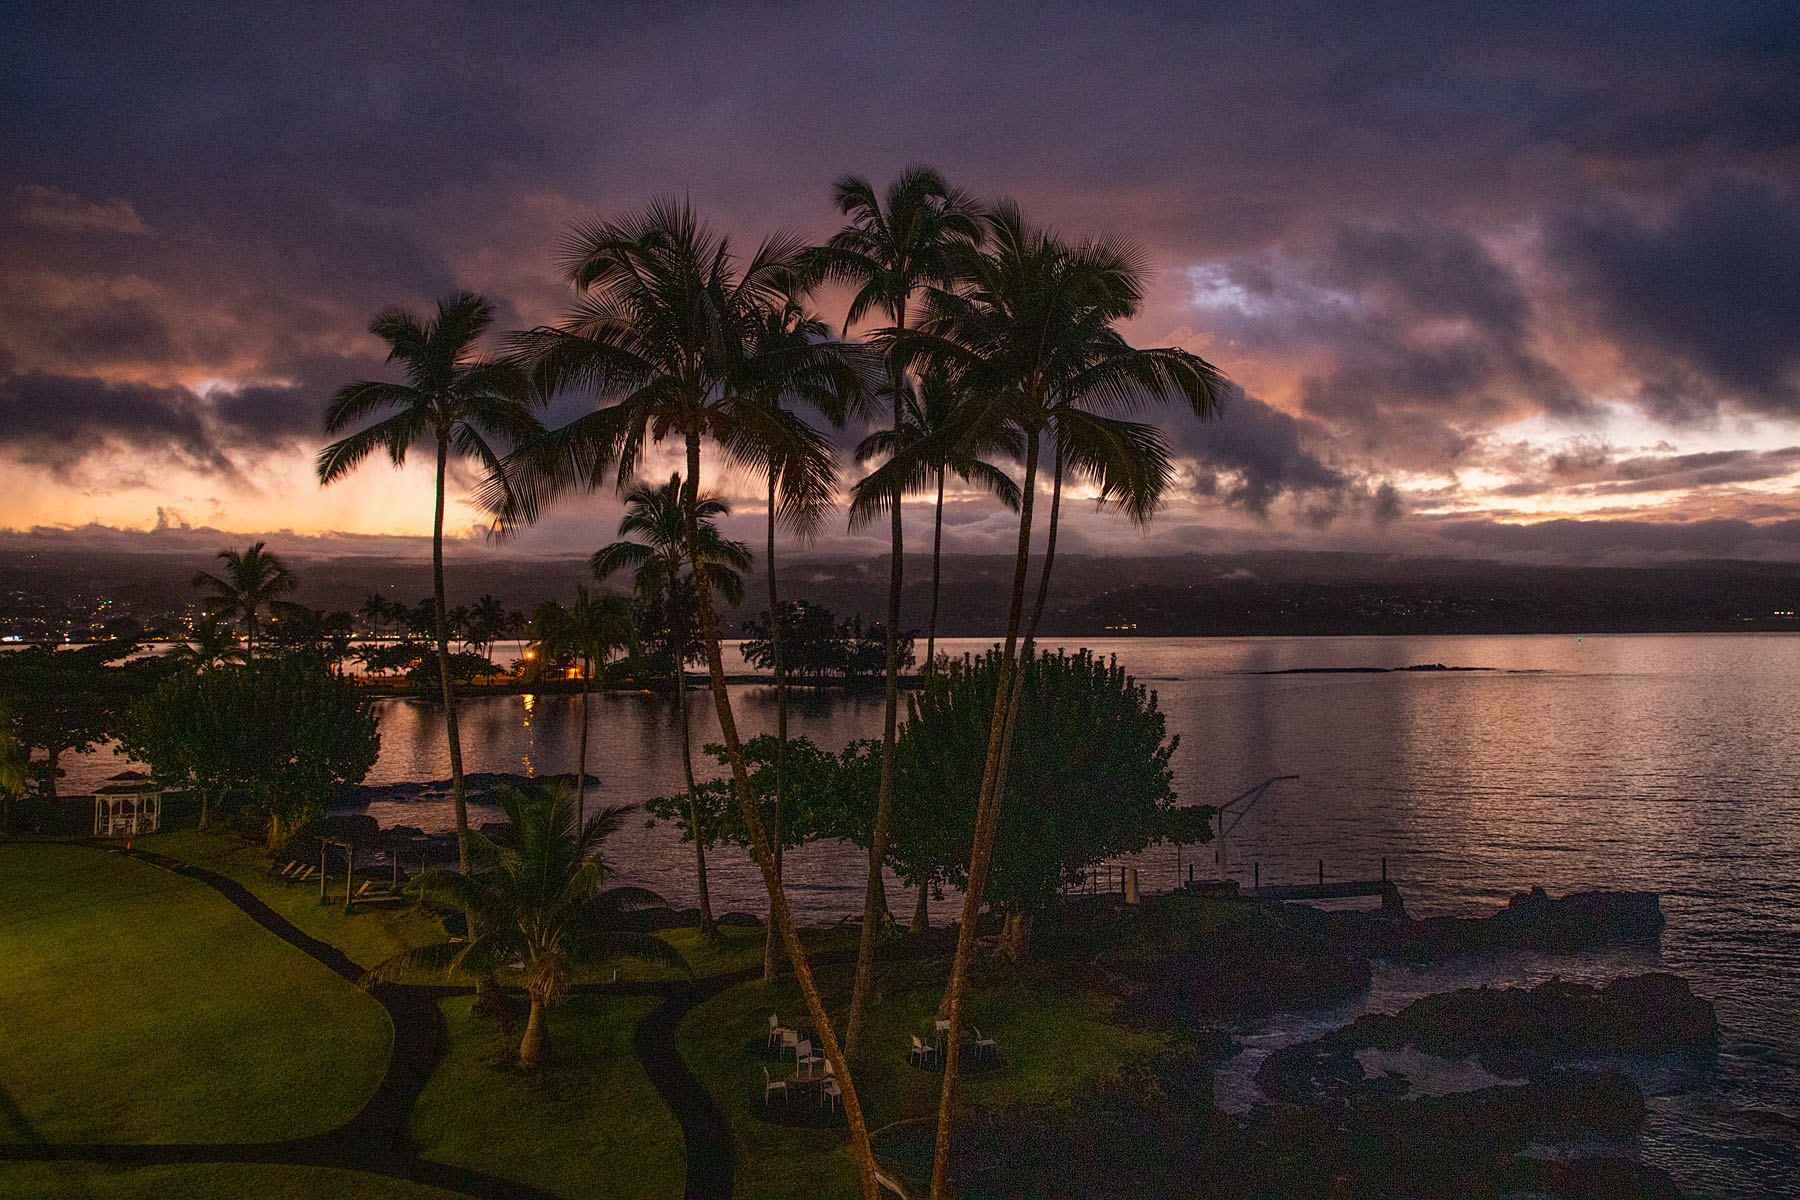 View from our hotel overlooking Hilo Bay, the Big Island.  Click for next photo.